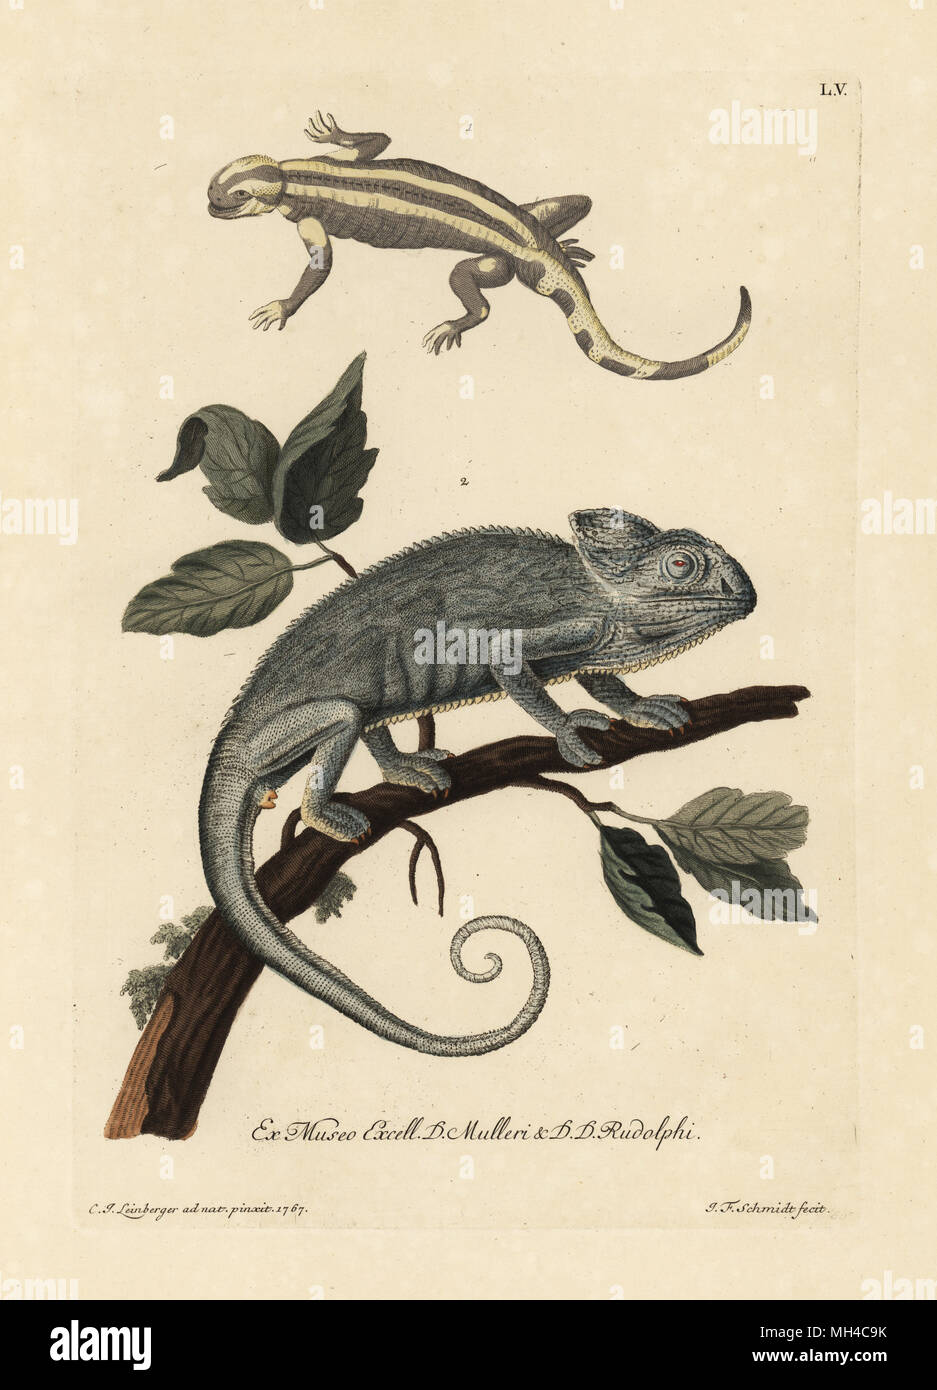 Salamander species and Indian chameleon, Chamaeleo zeylanicus. (Le salmandre, Salamandra, un cameleon de Bengale.) Handcoloured copperplate engraving by  after an illustration by from Georg Wolfgang Knorr's Deliciae Naturae Selectae of Kabinet van Zeldzaamheden der Natuur, Blusse and Son, Nuremberg, 1771. Specimens from Wunderkammer or Cabinet of Curiosities owned by P.L. Muller and D. Rudolph. Stock Photo